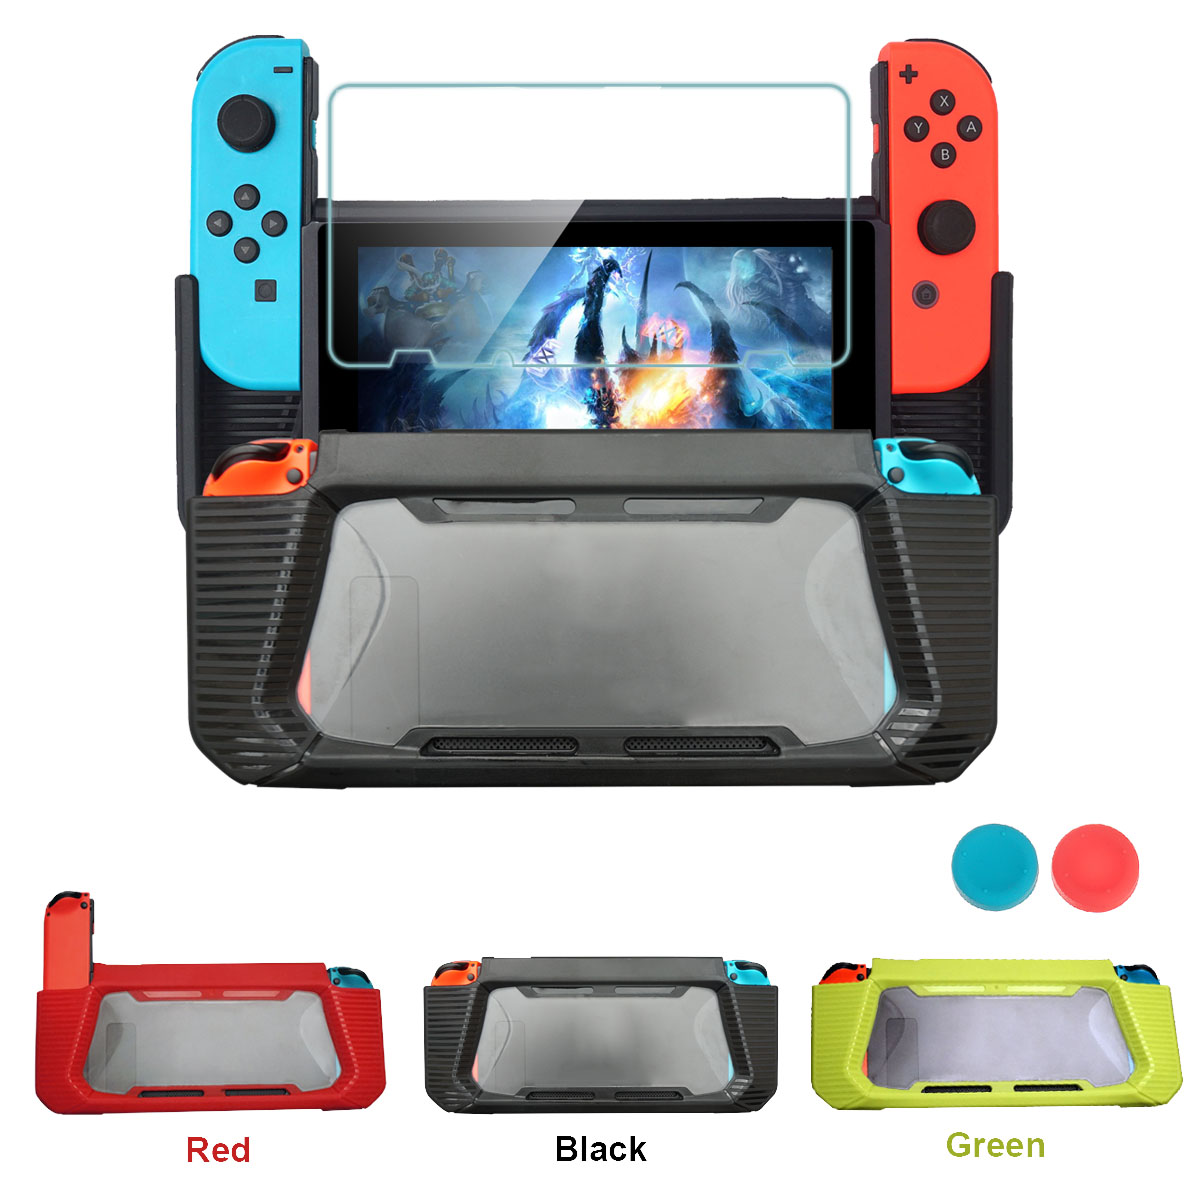 Backboard Radiator Hard Cover Shell Hybrid Protective Case For Nintendo Switch Game Console